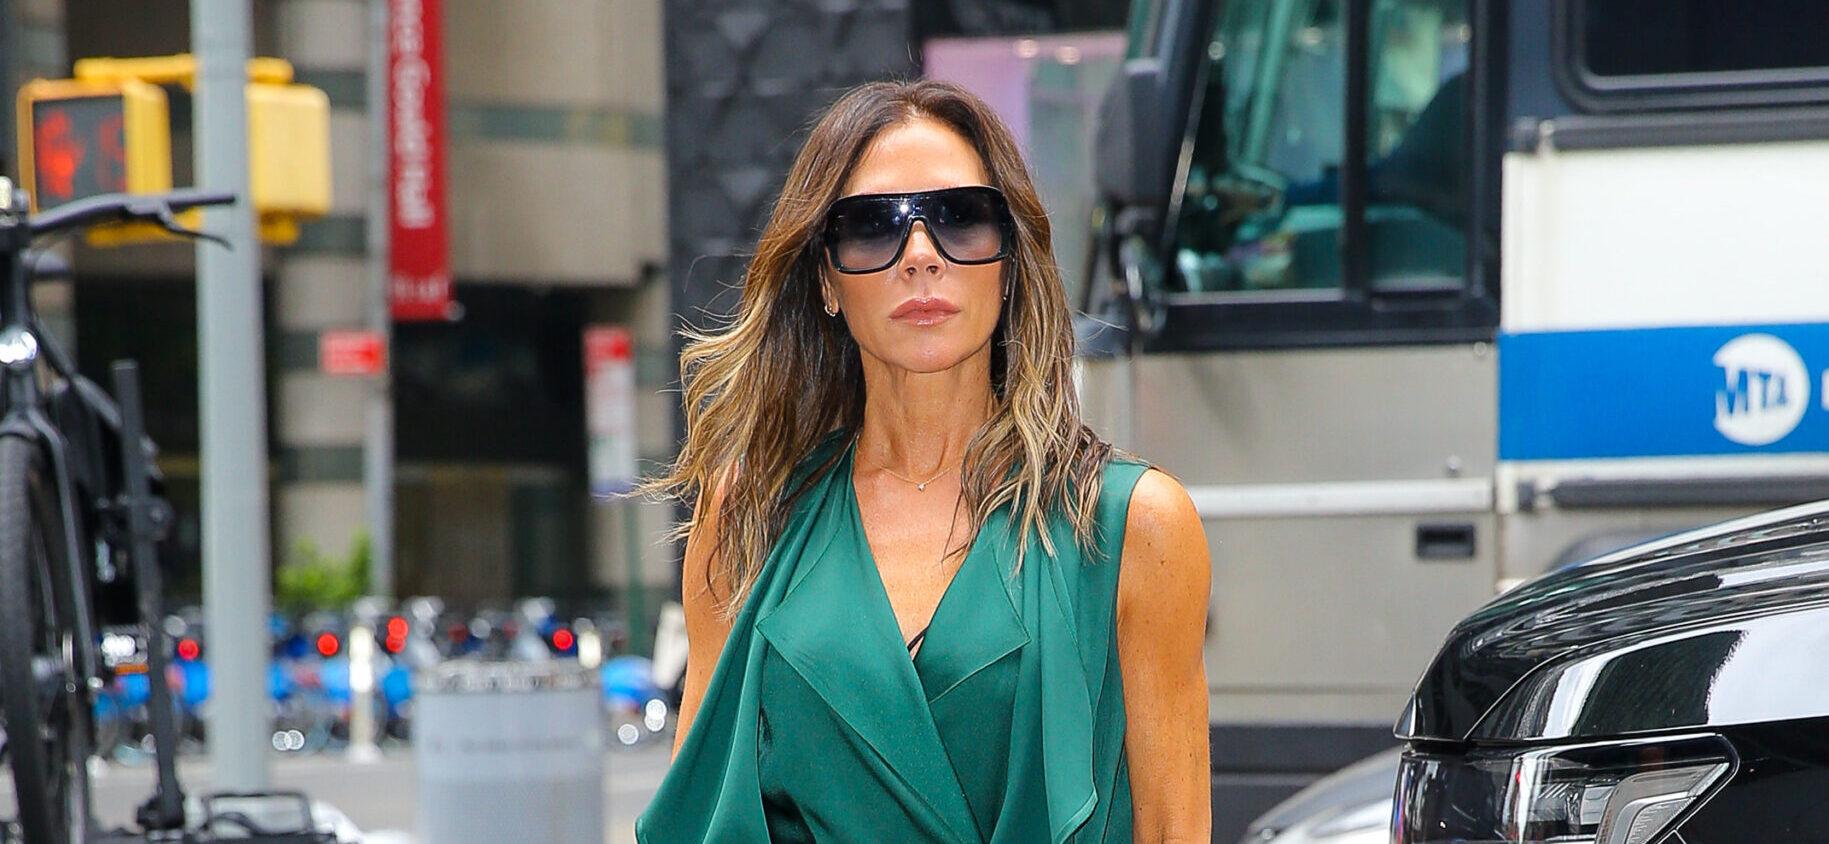 Victoria Beckham looks radiant in a green dress while making a quick stop at Balenciaga store in New York City